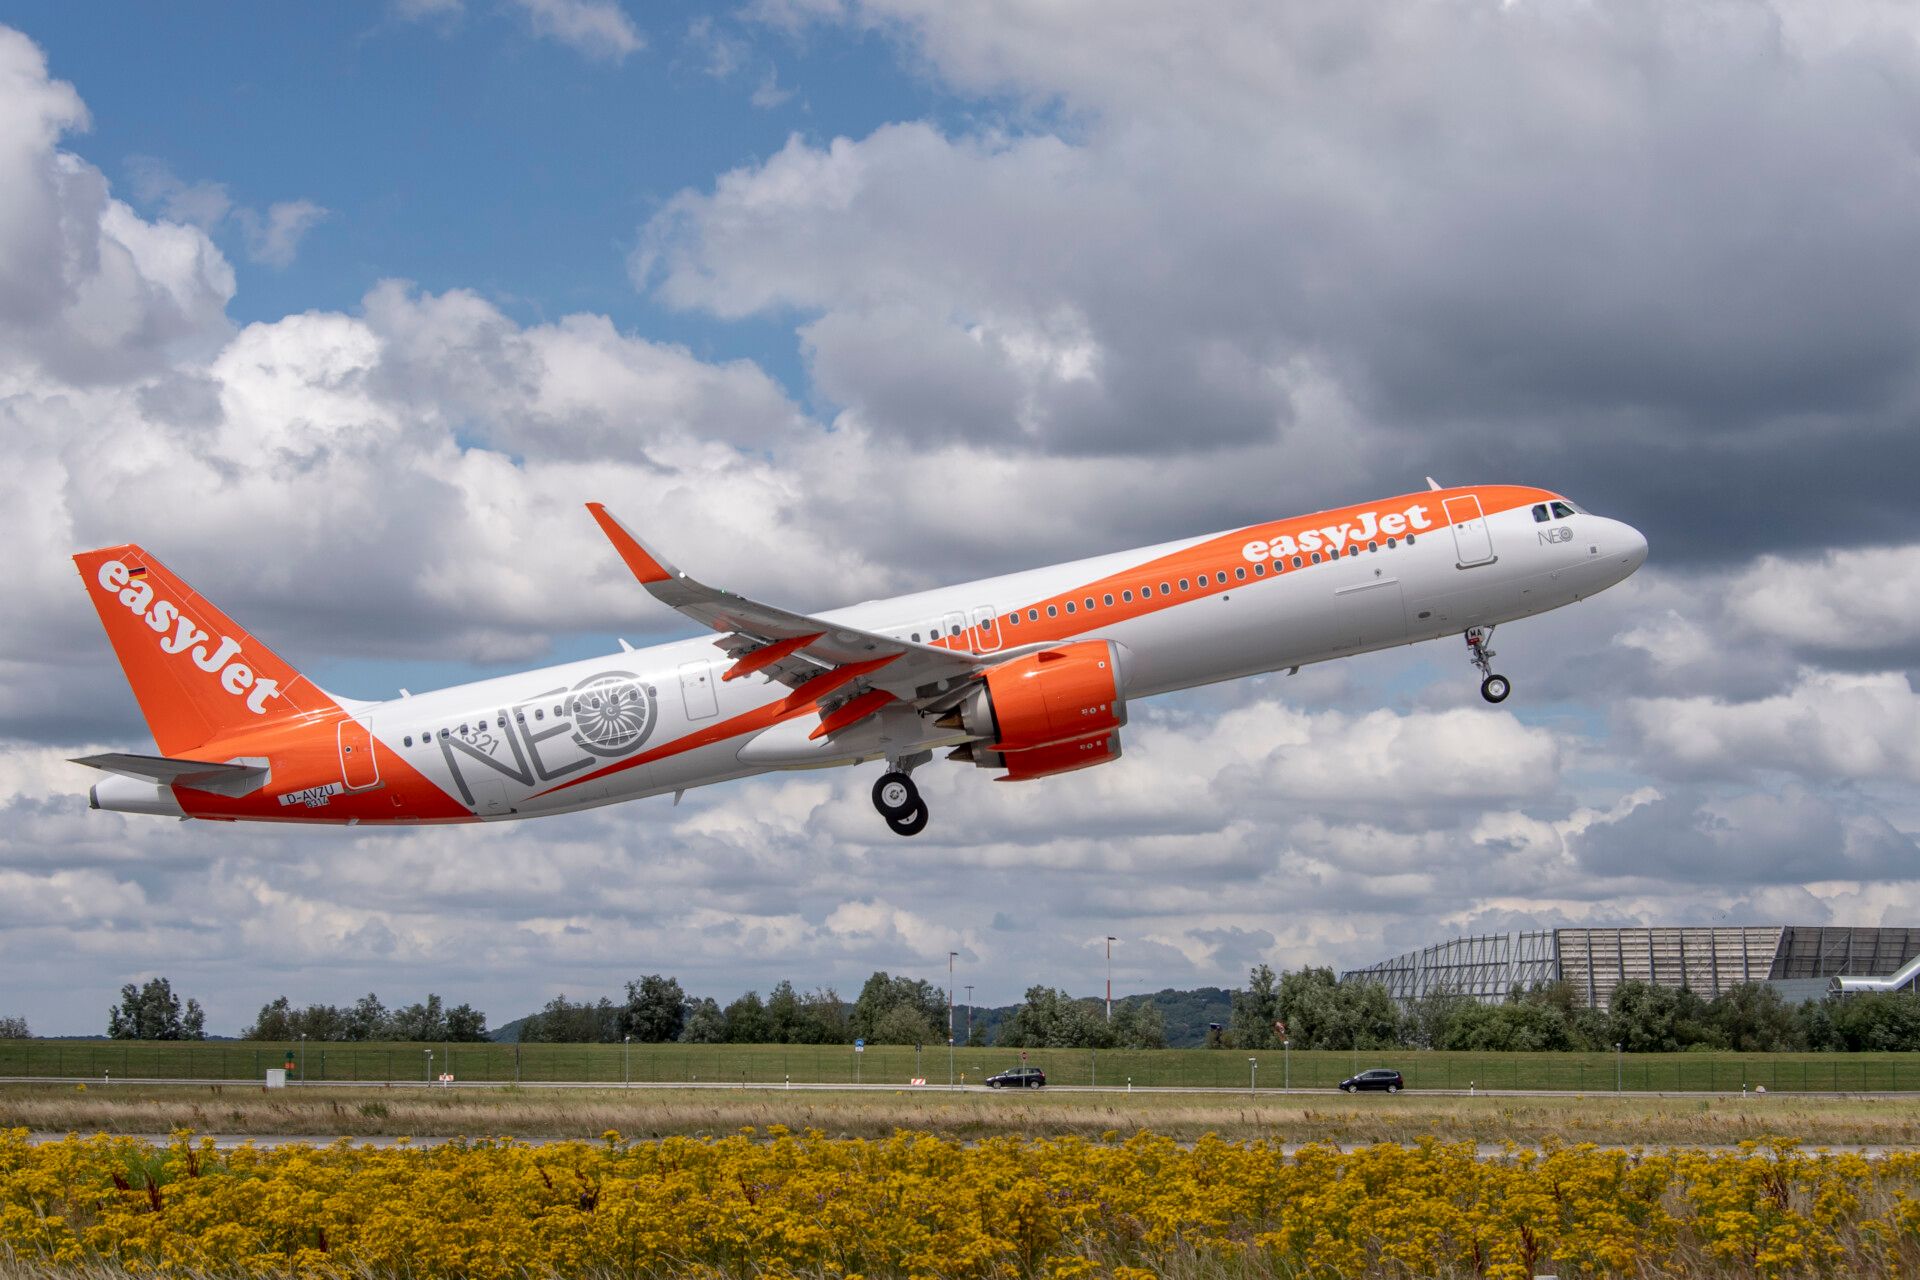 An easyJet Airbus A321neo just after takeoff.